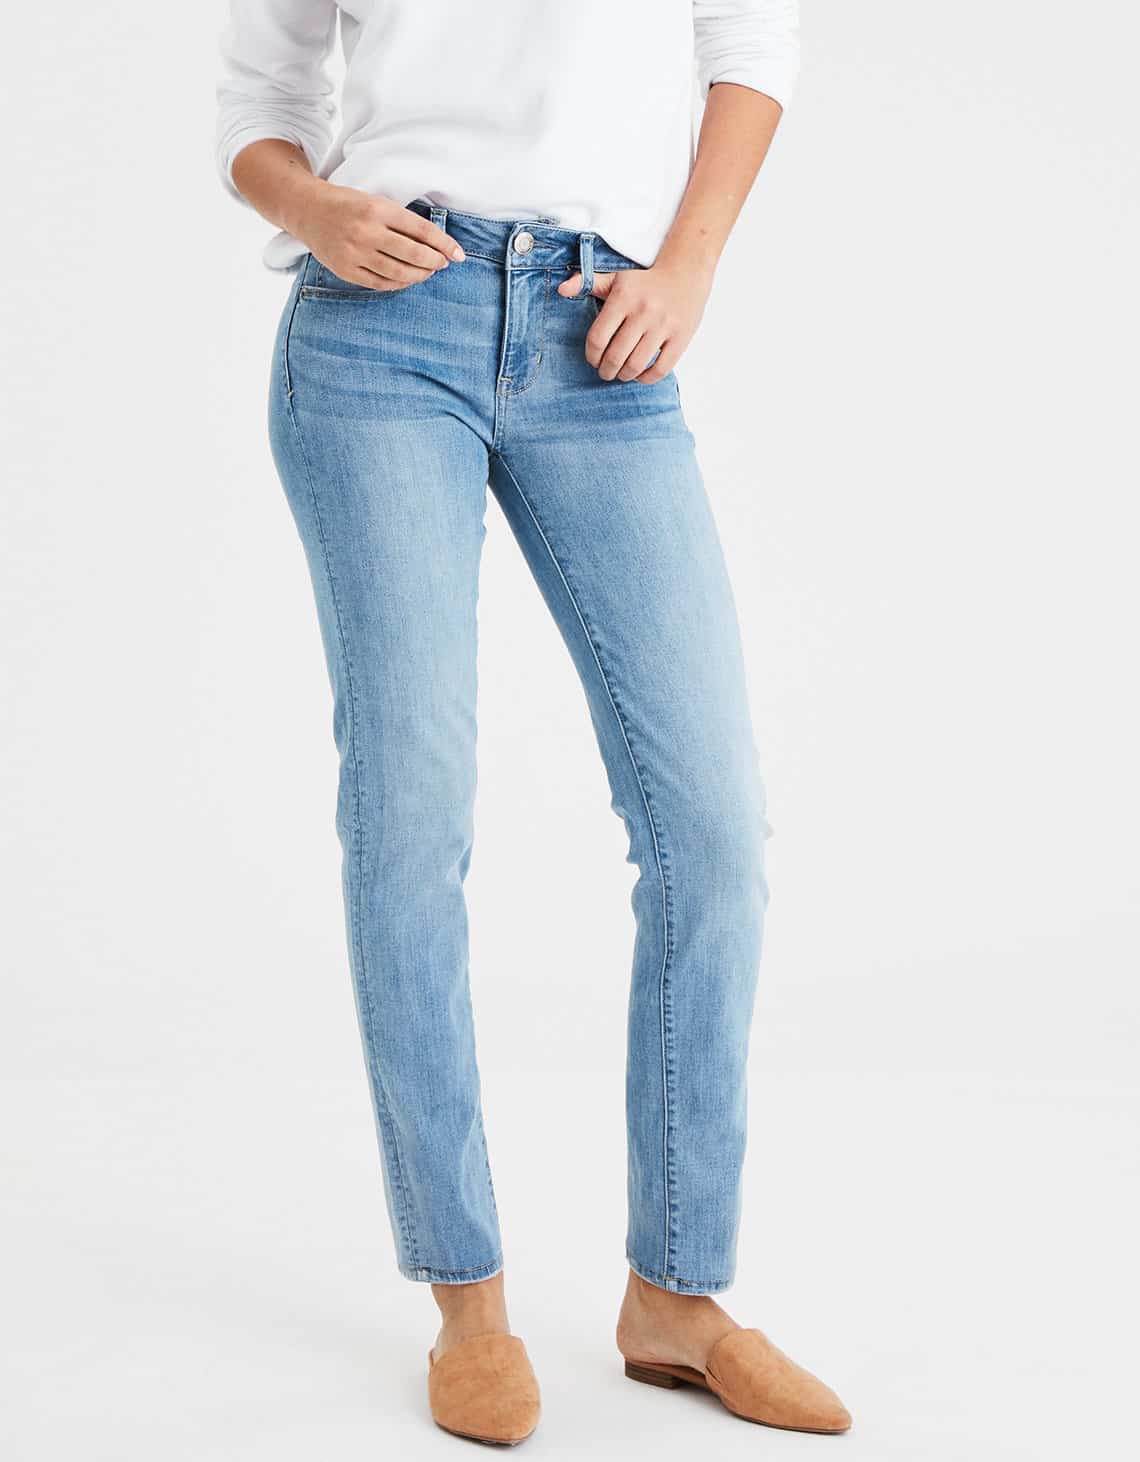 best comfy jeans